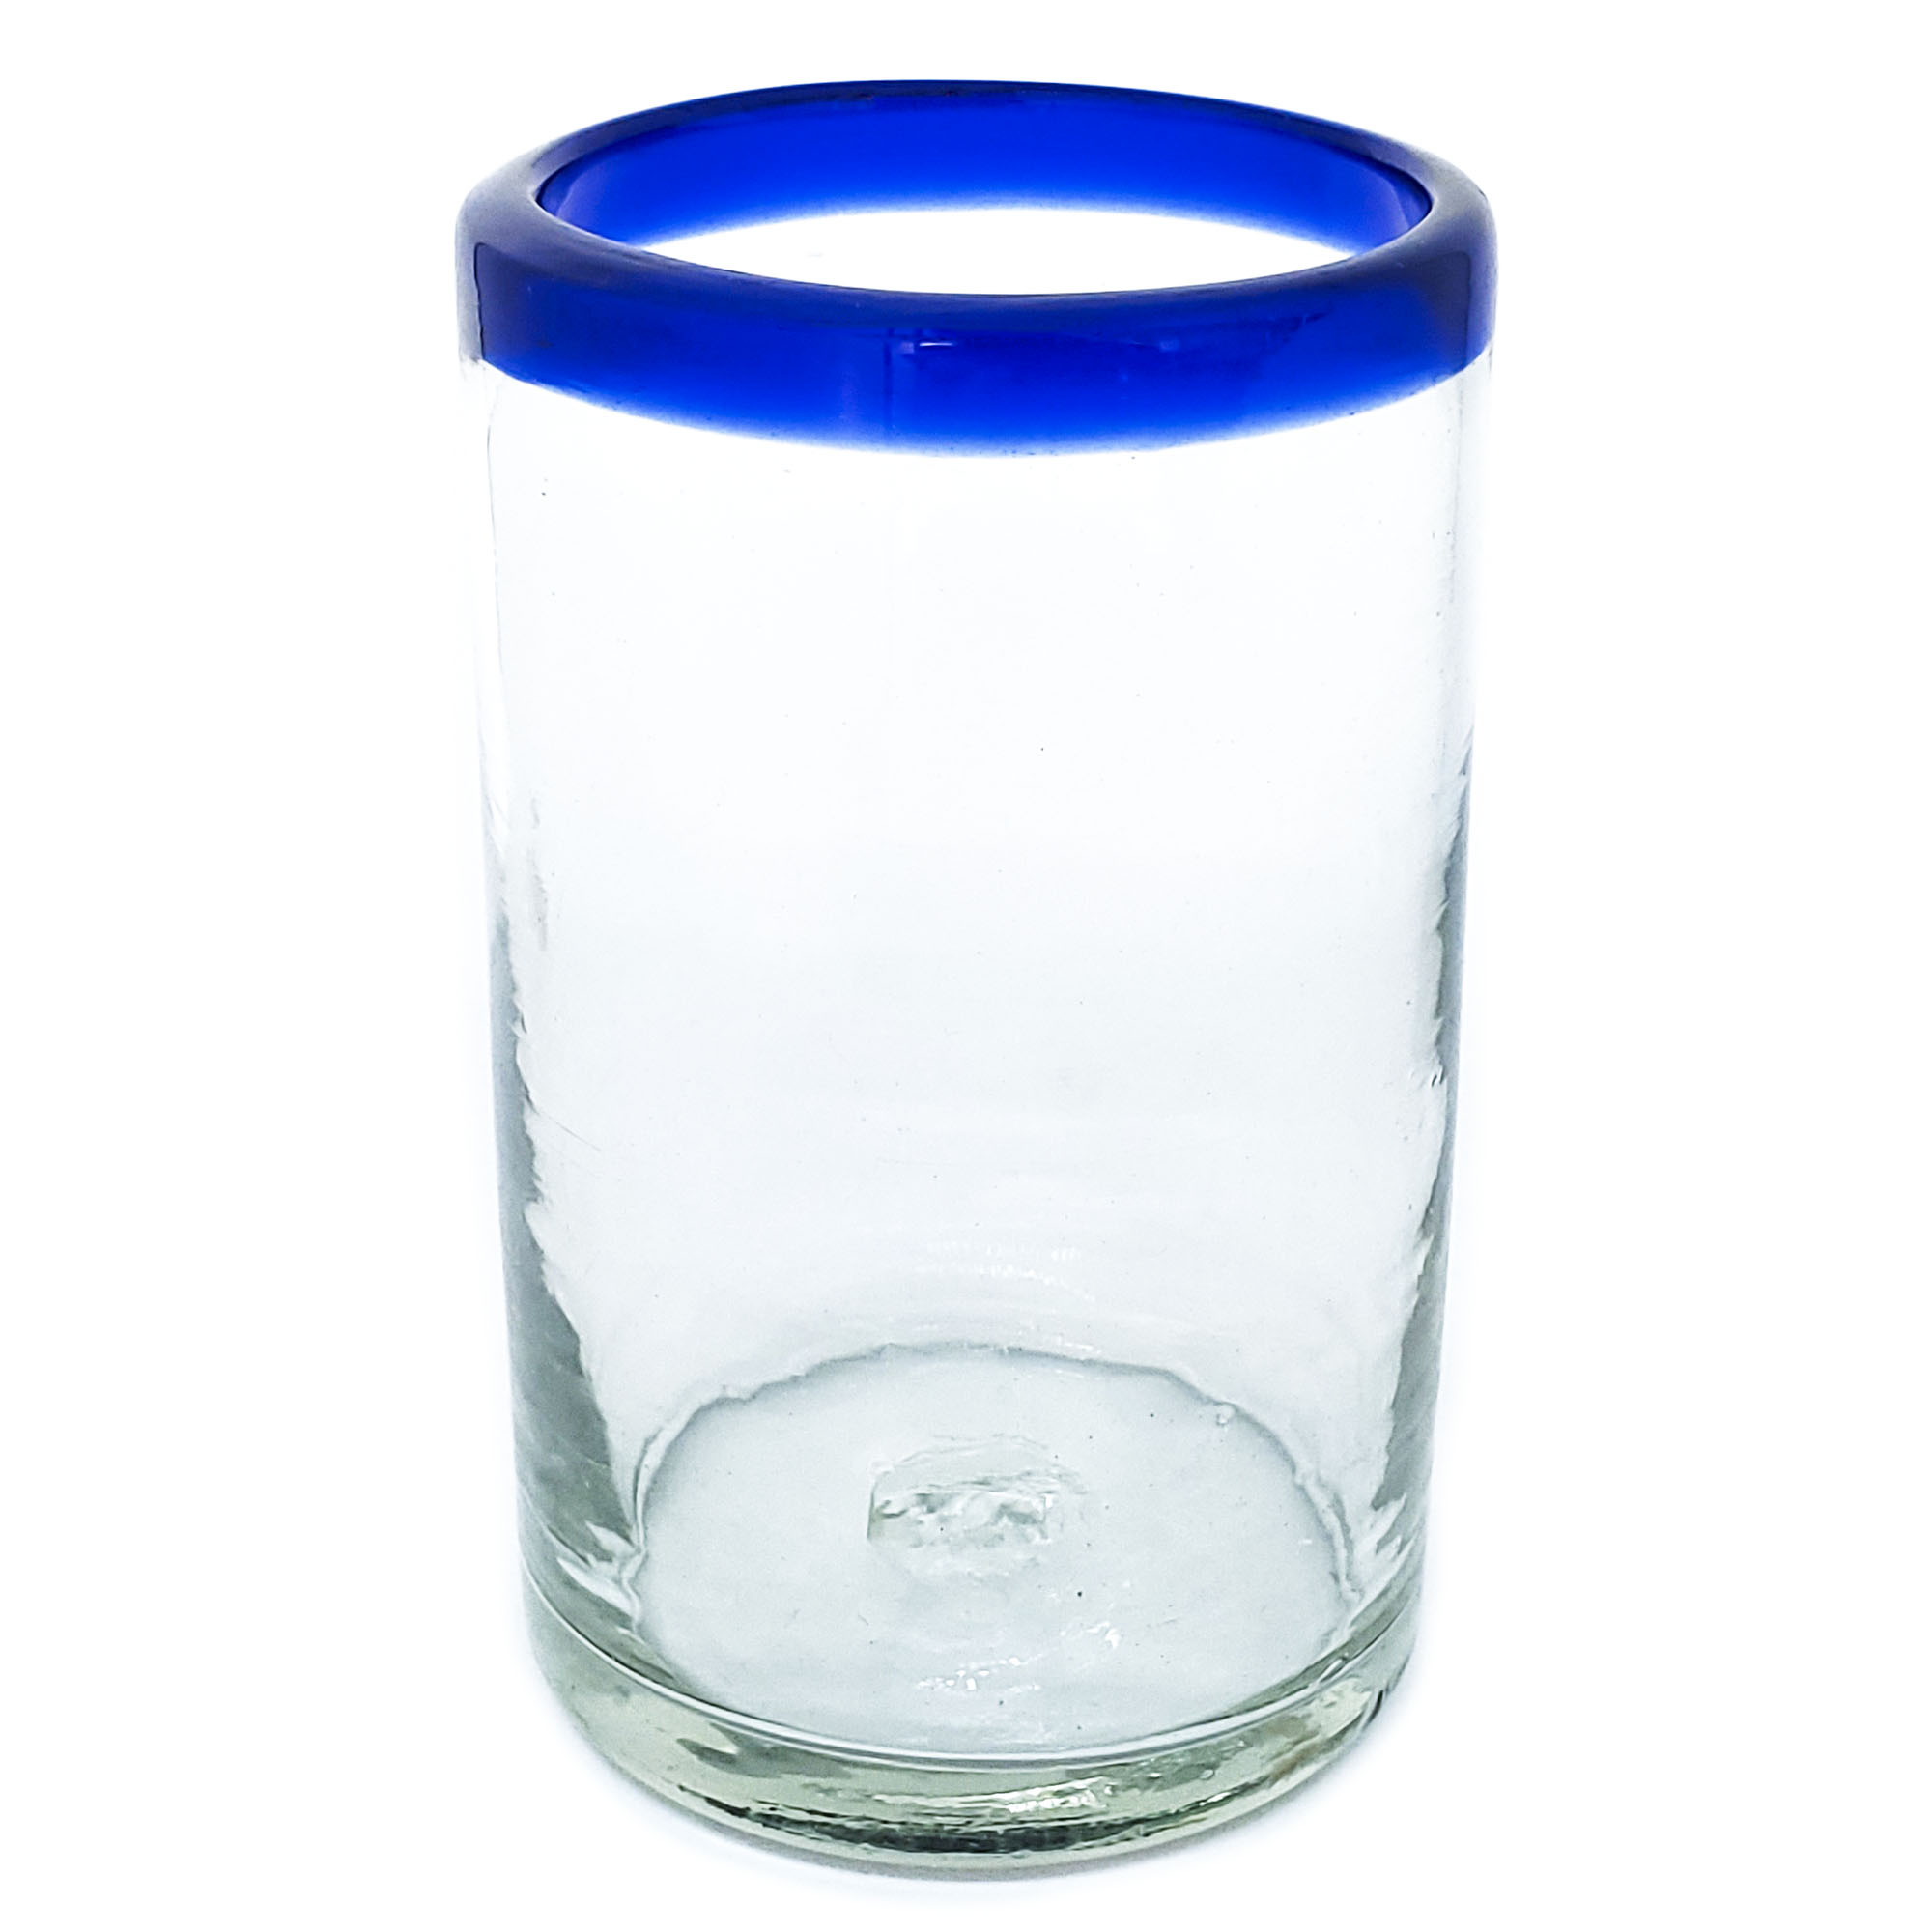 Wholesale Cobalt Blue Rim Glassware / Cobalt Blue Rim 14 oz Drinking Glasses  / These handcrafted glasses deliver a classic touch to your favorite drink.